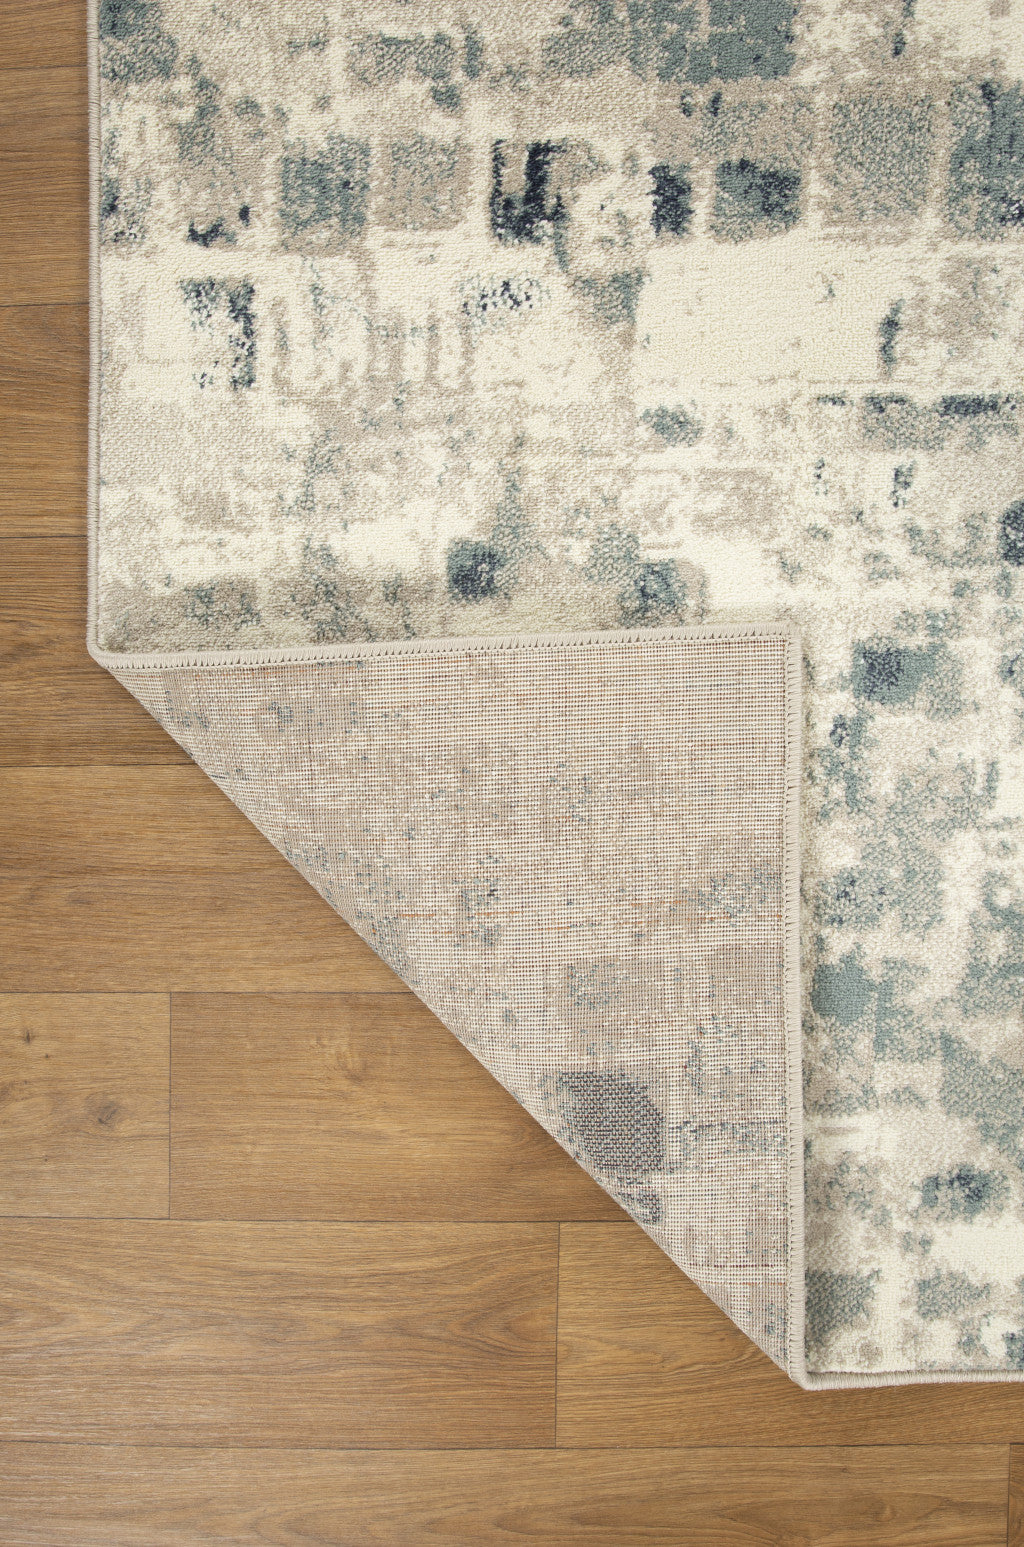 5’ x 8’ Beige Blue Abstract Tiles Distressed Area Rug